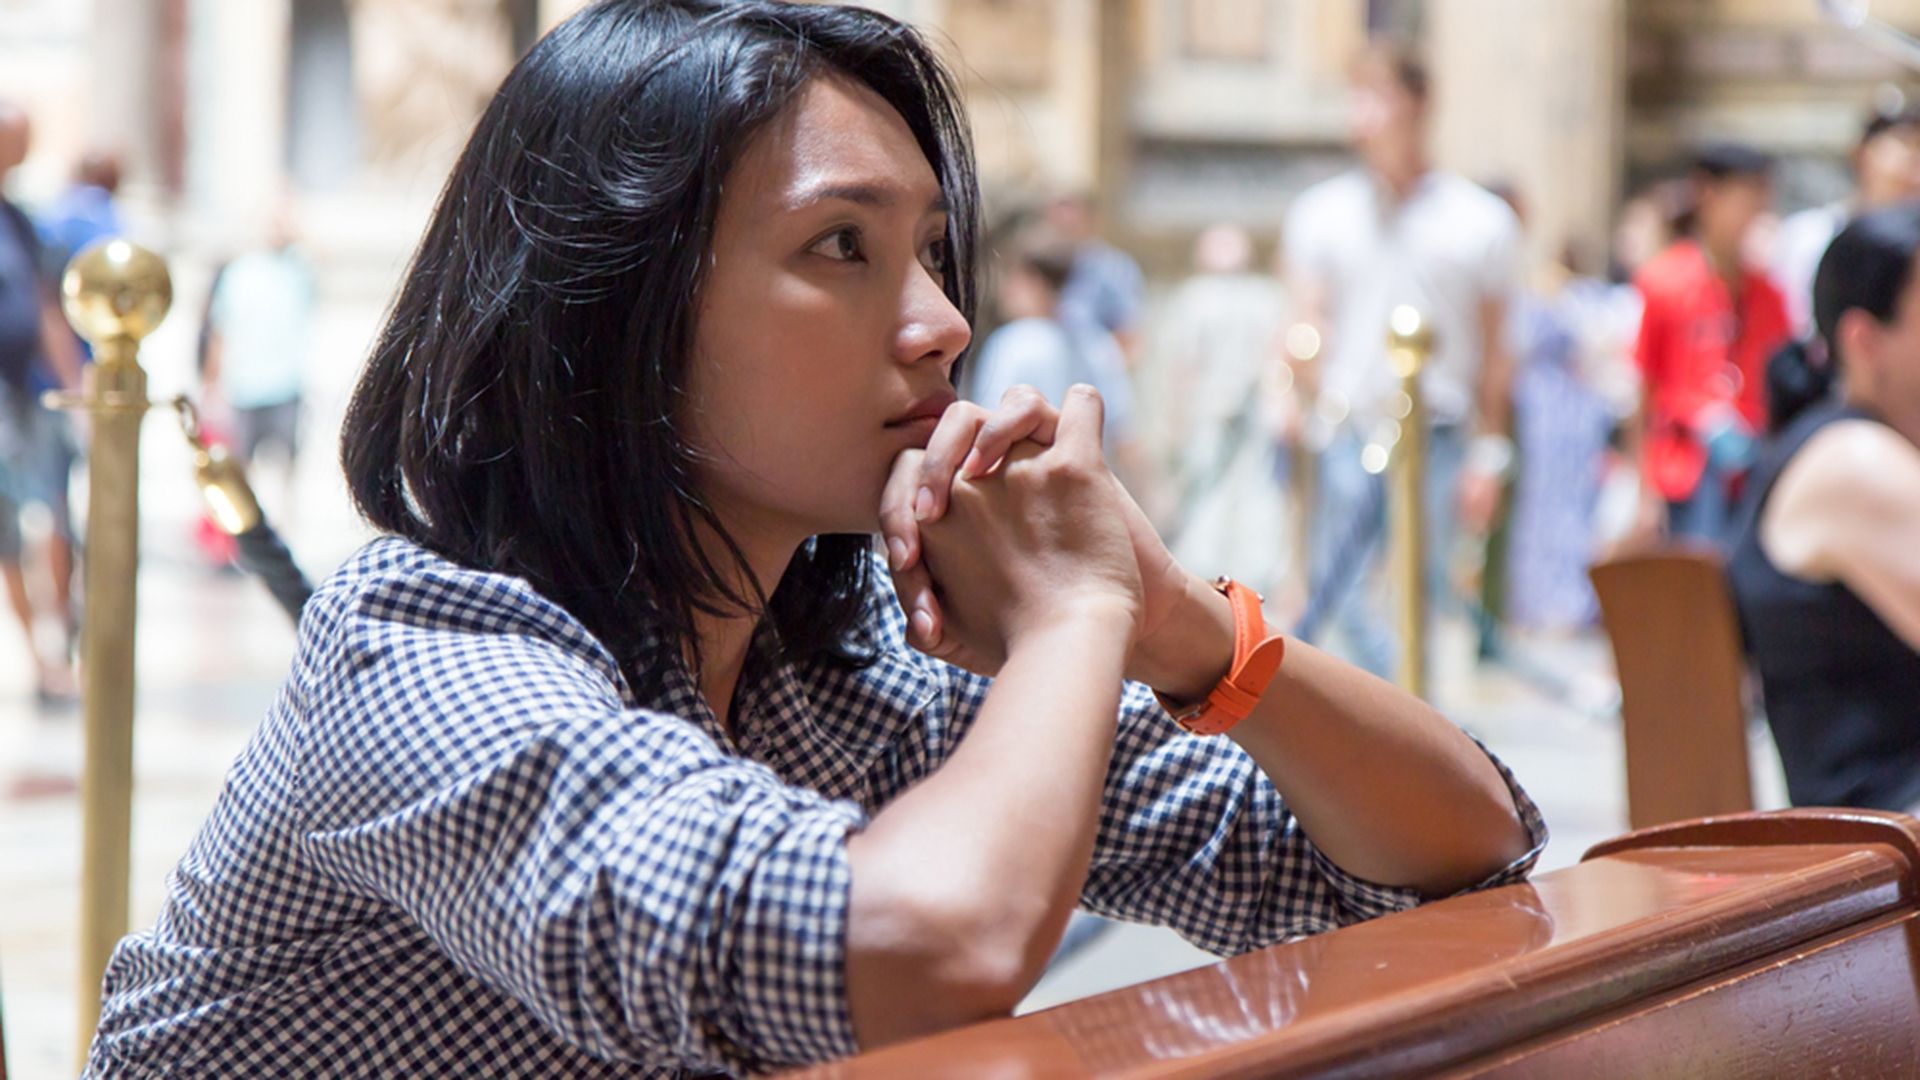 Going to church can help women be healthier, live longer